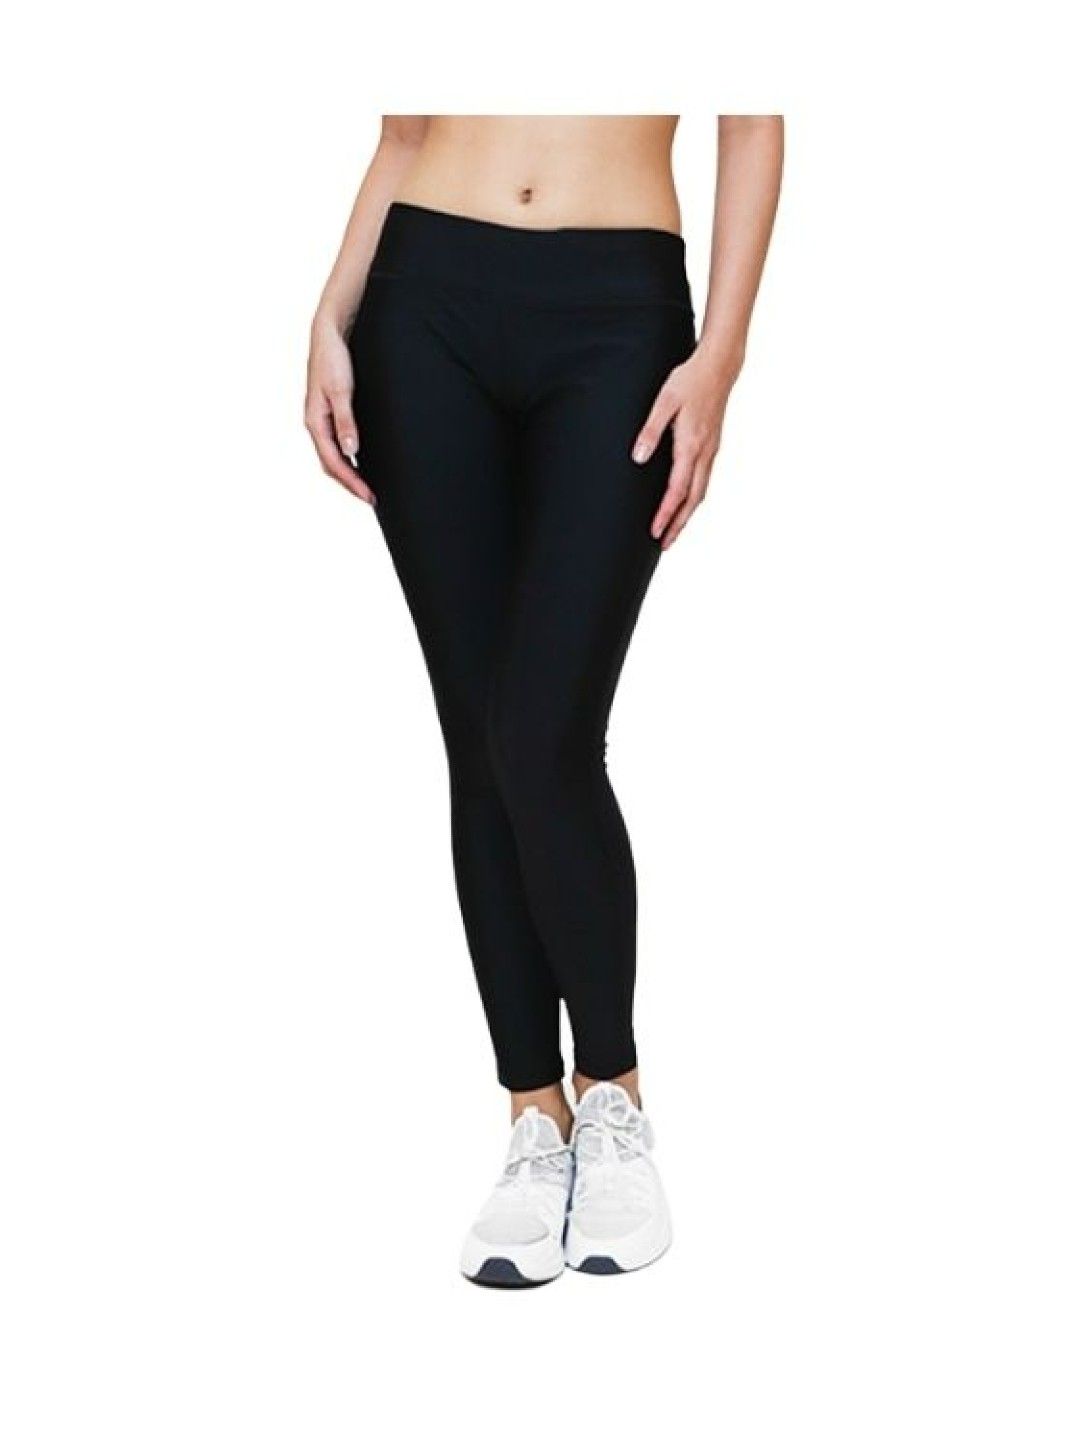 Womanly Dry Fit Leggings